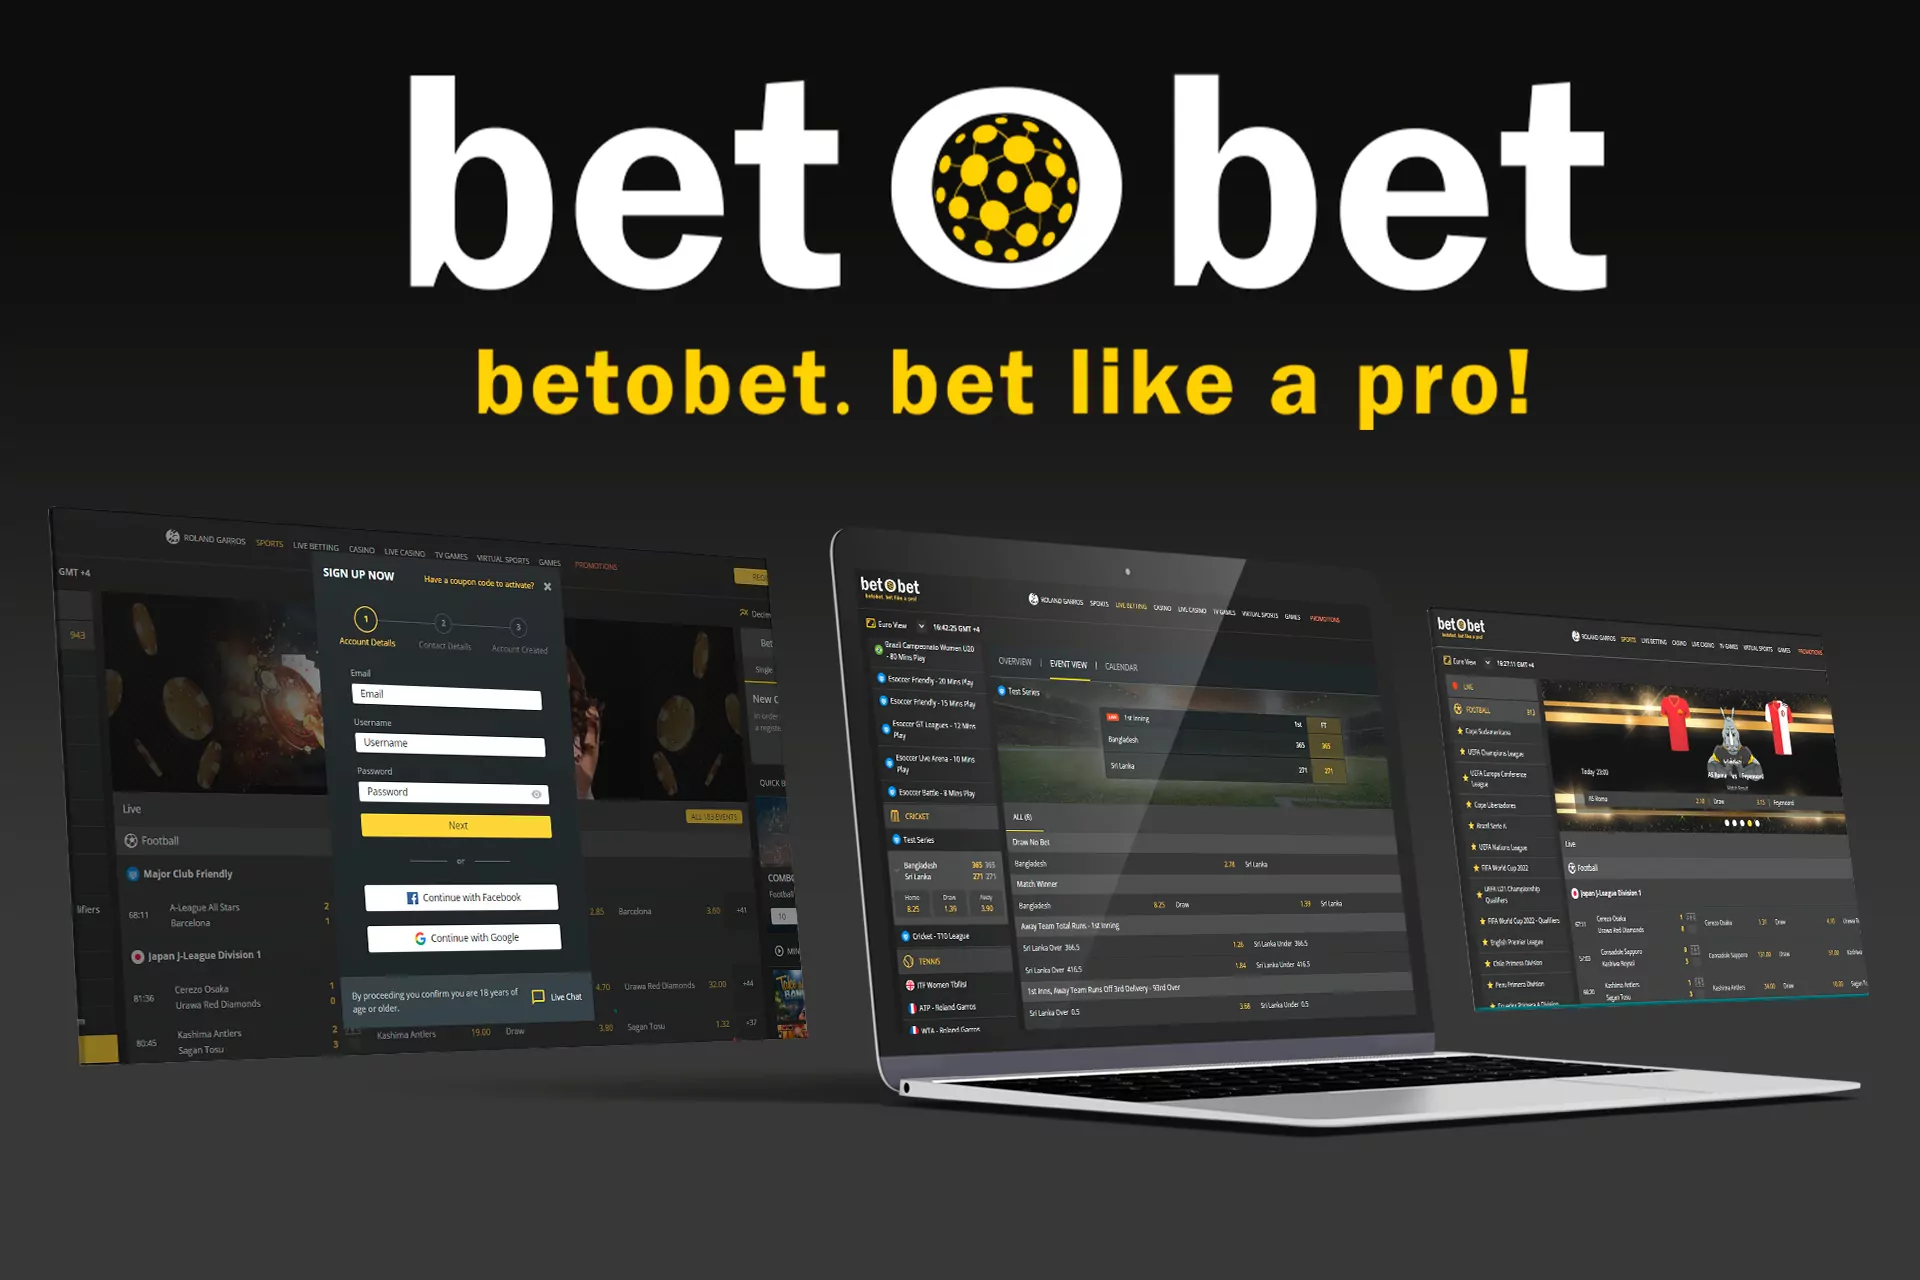 Betobet has a wide range of sports to bet on including cricket.